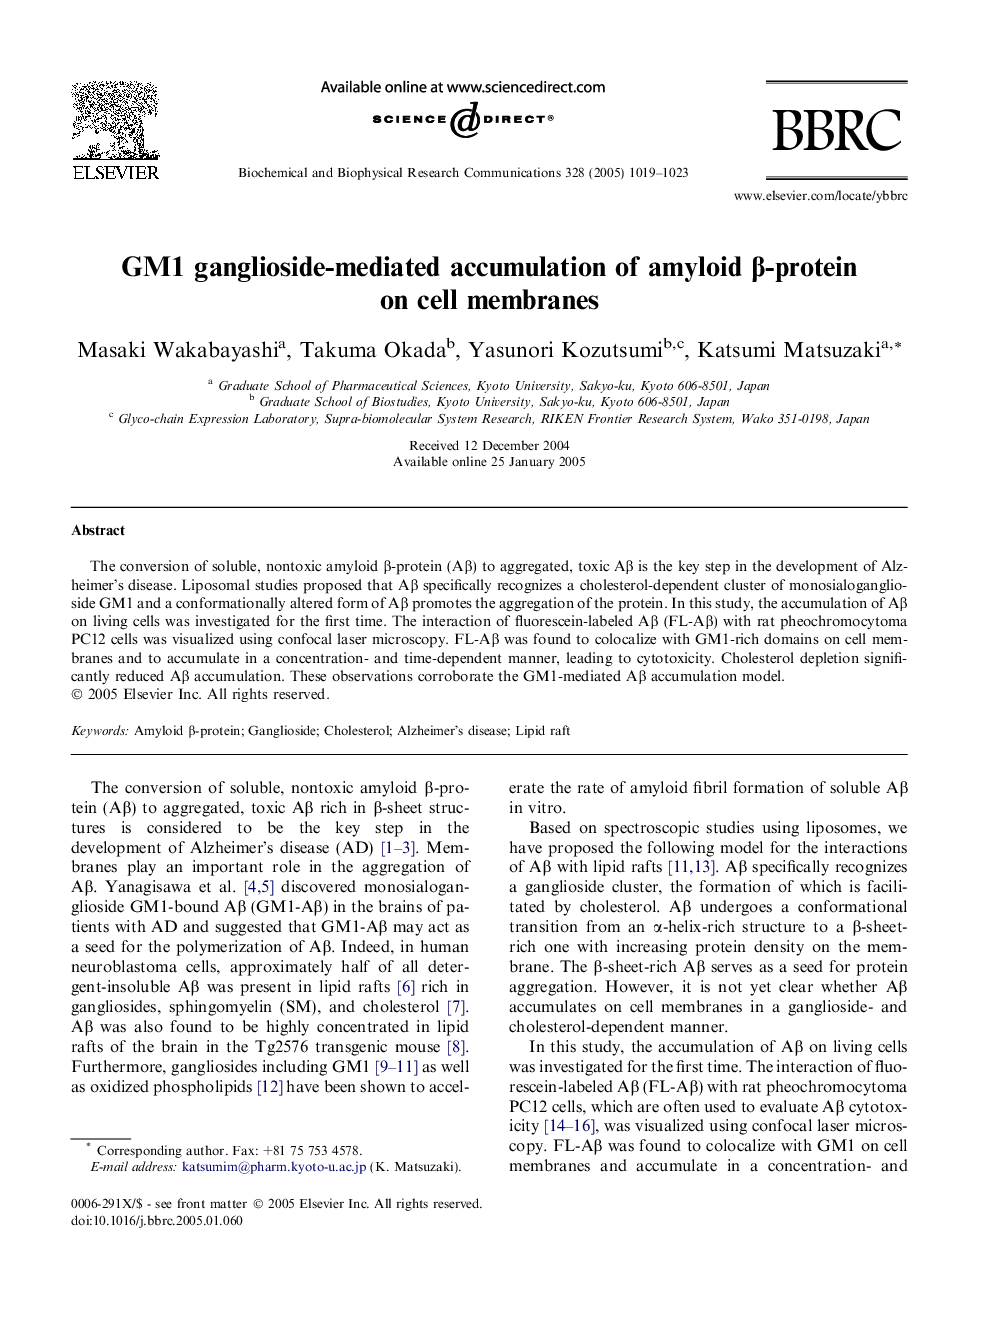 GM1 ganglioside-mediated accumulation of amyloid Î²-protein on cell membranes